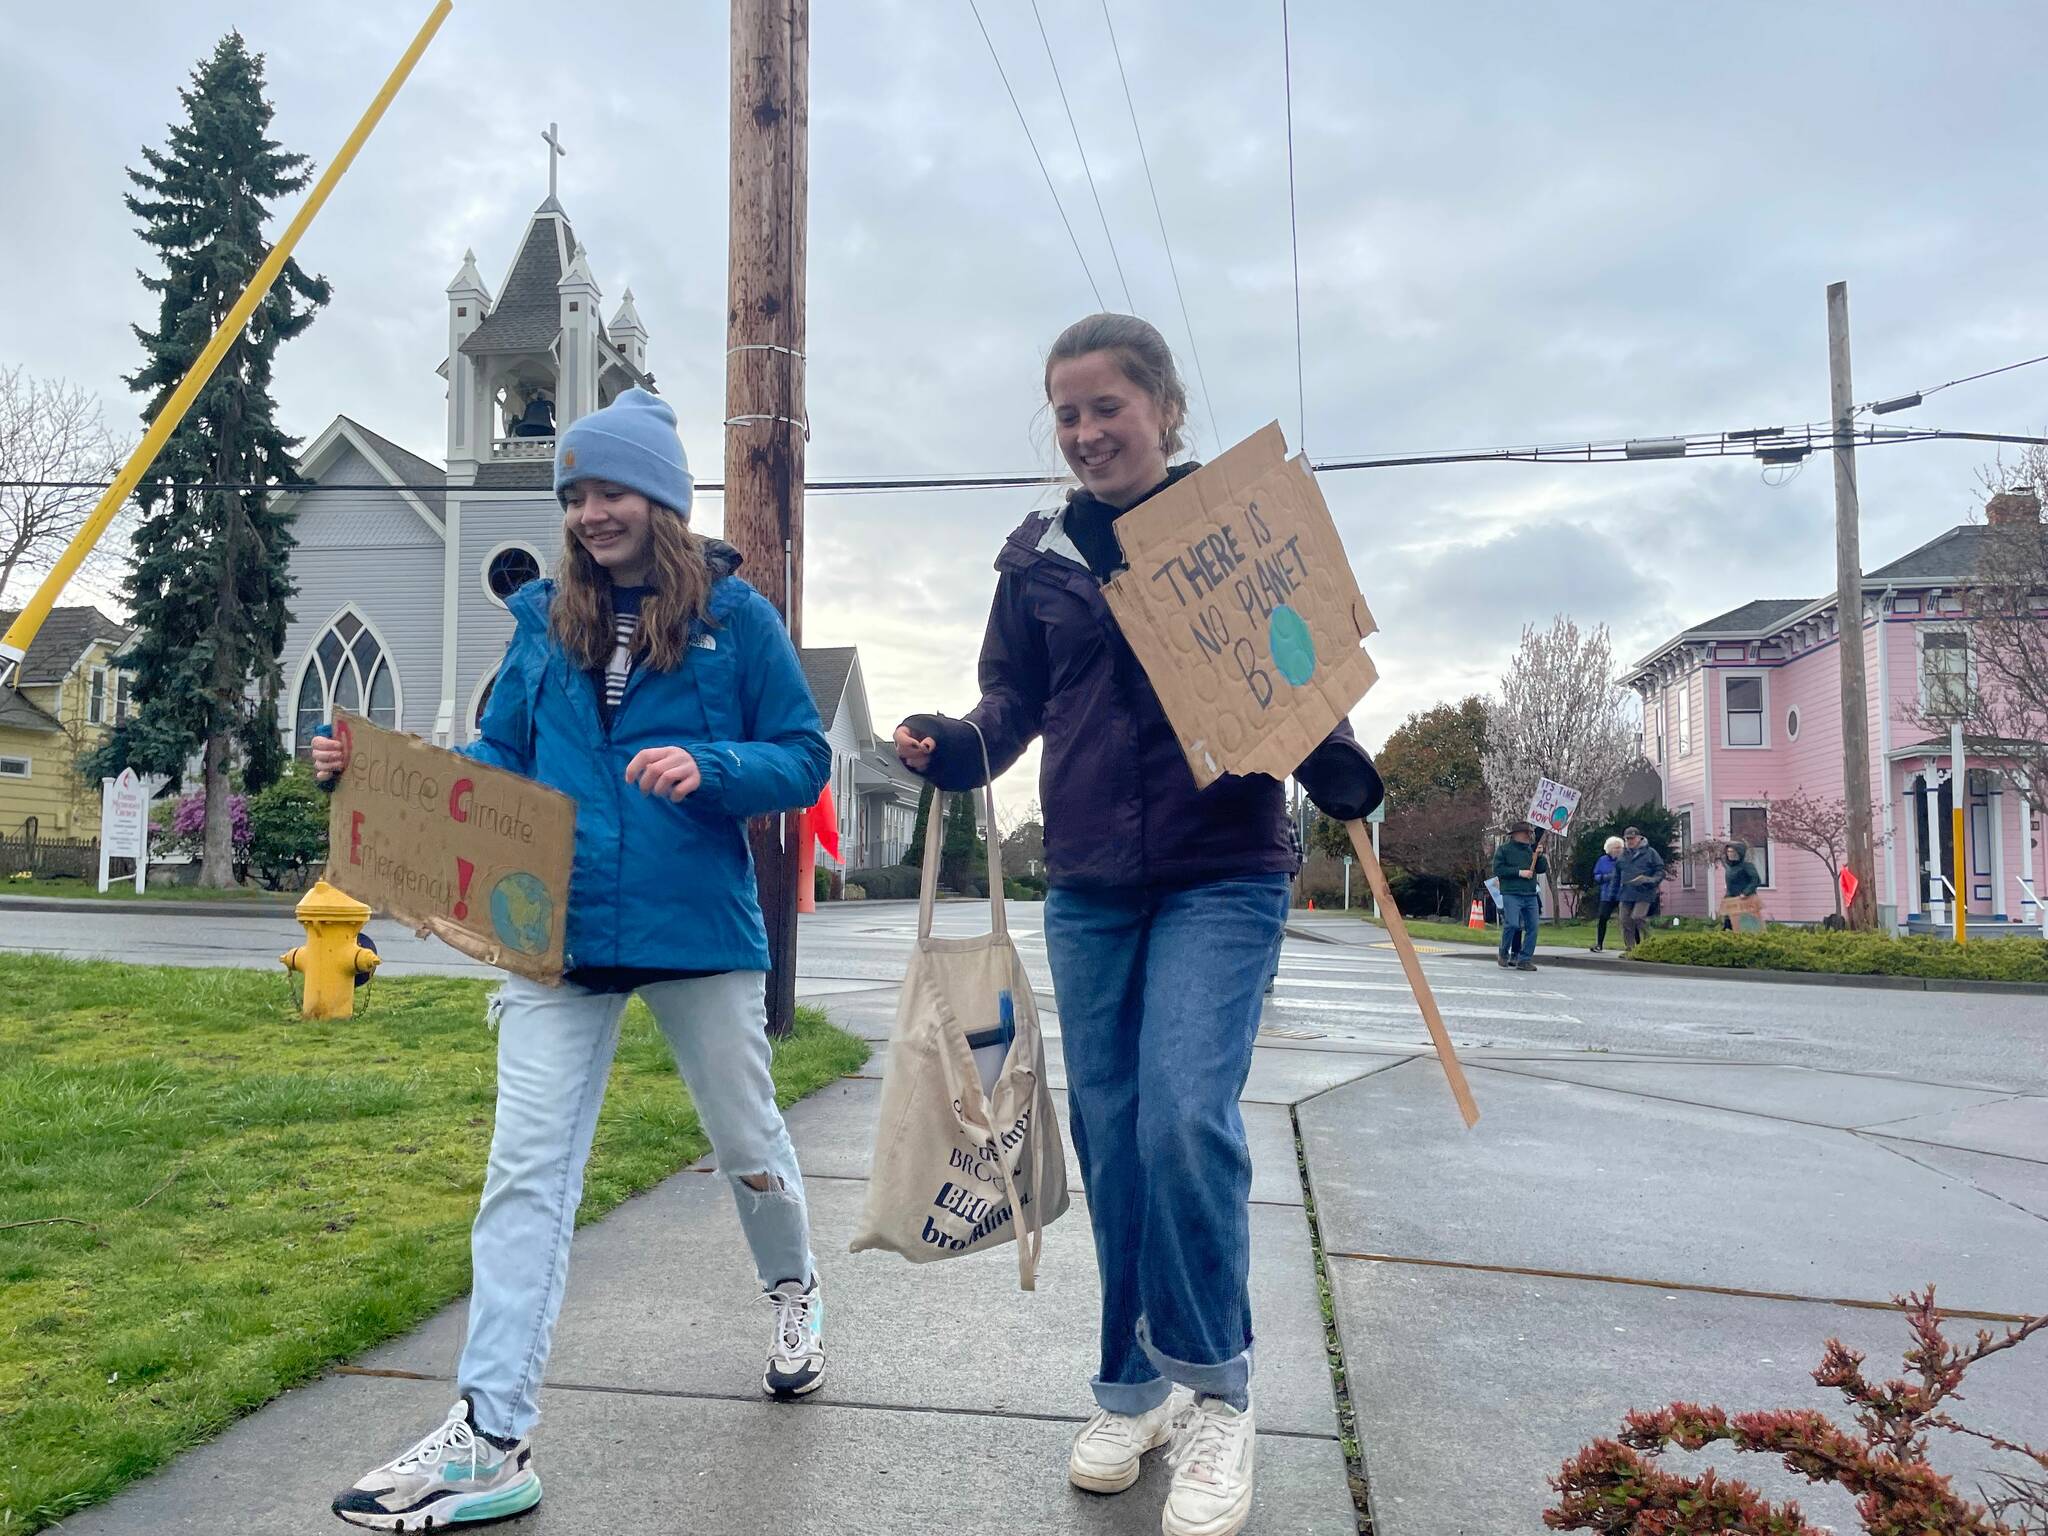 Students and community activists rally in Coupeville March 24 to voice their support for a county climate emergency declaration. (Photo provided)